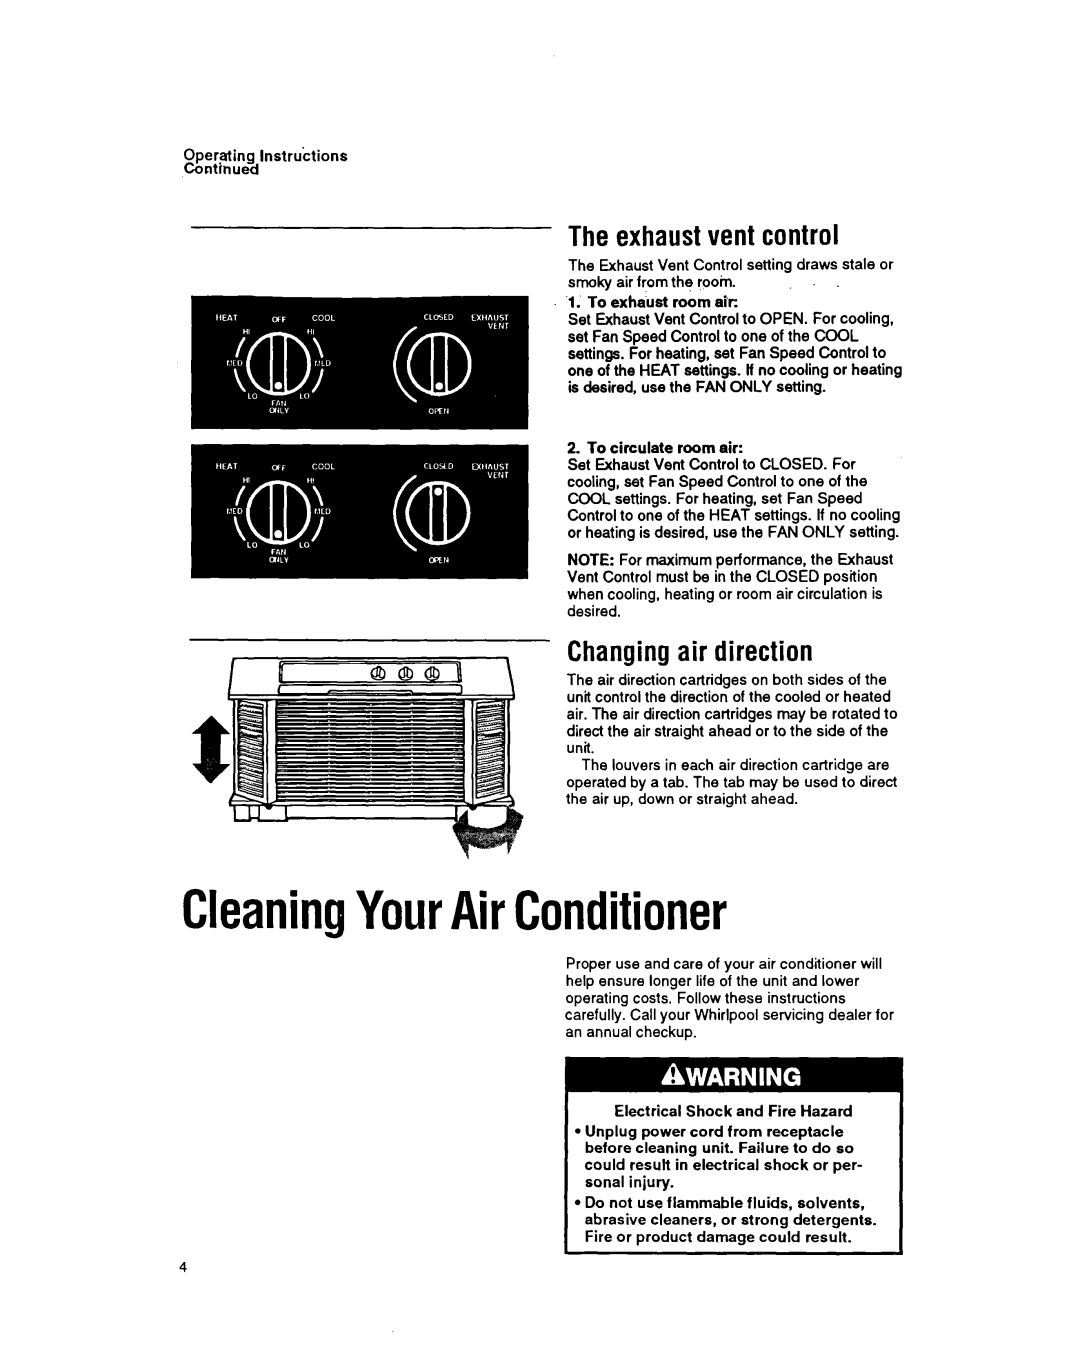 Whirlpool ACH122, ACH082, ACH184, ACH102 manual CleaningYourAirConditioner, The exhaust vent control, Changing air direction 